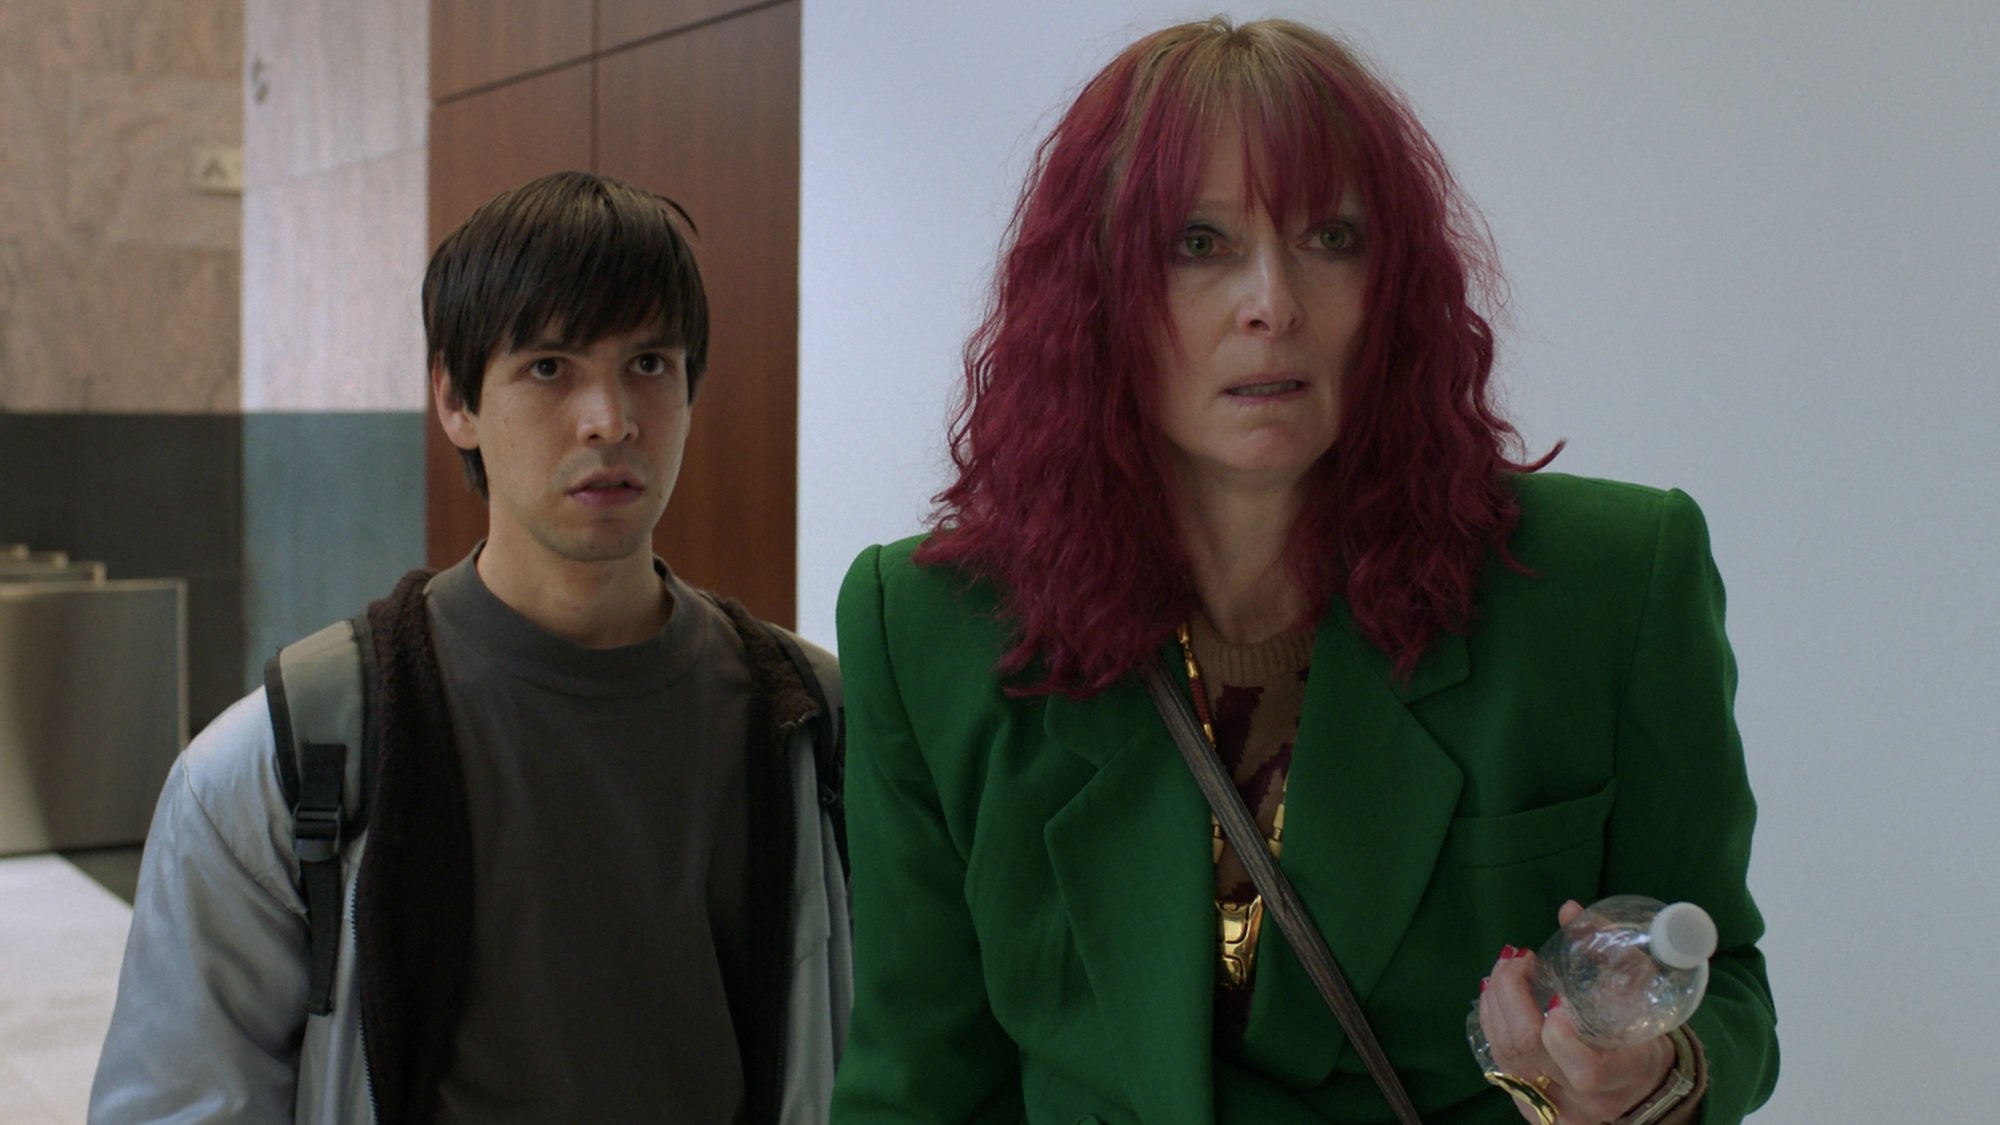 A man in a grey jacket and a woman with pink hair wearing a green jacket stand together with shocked looks on their faces.